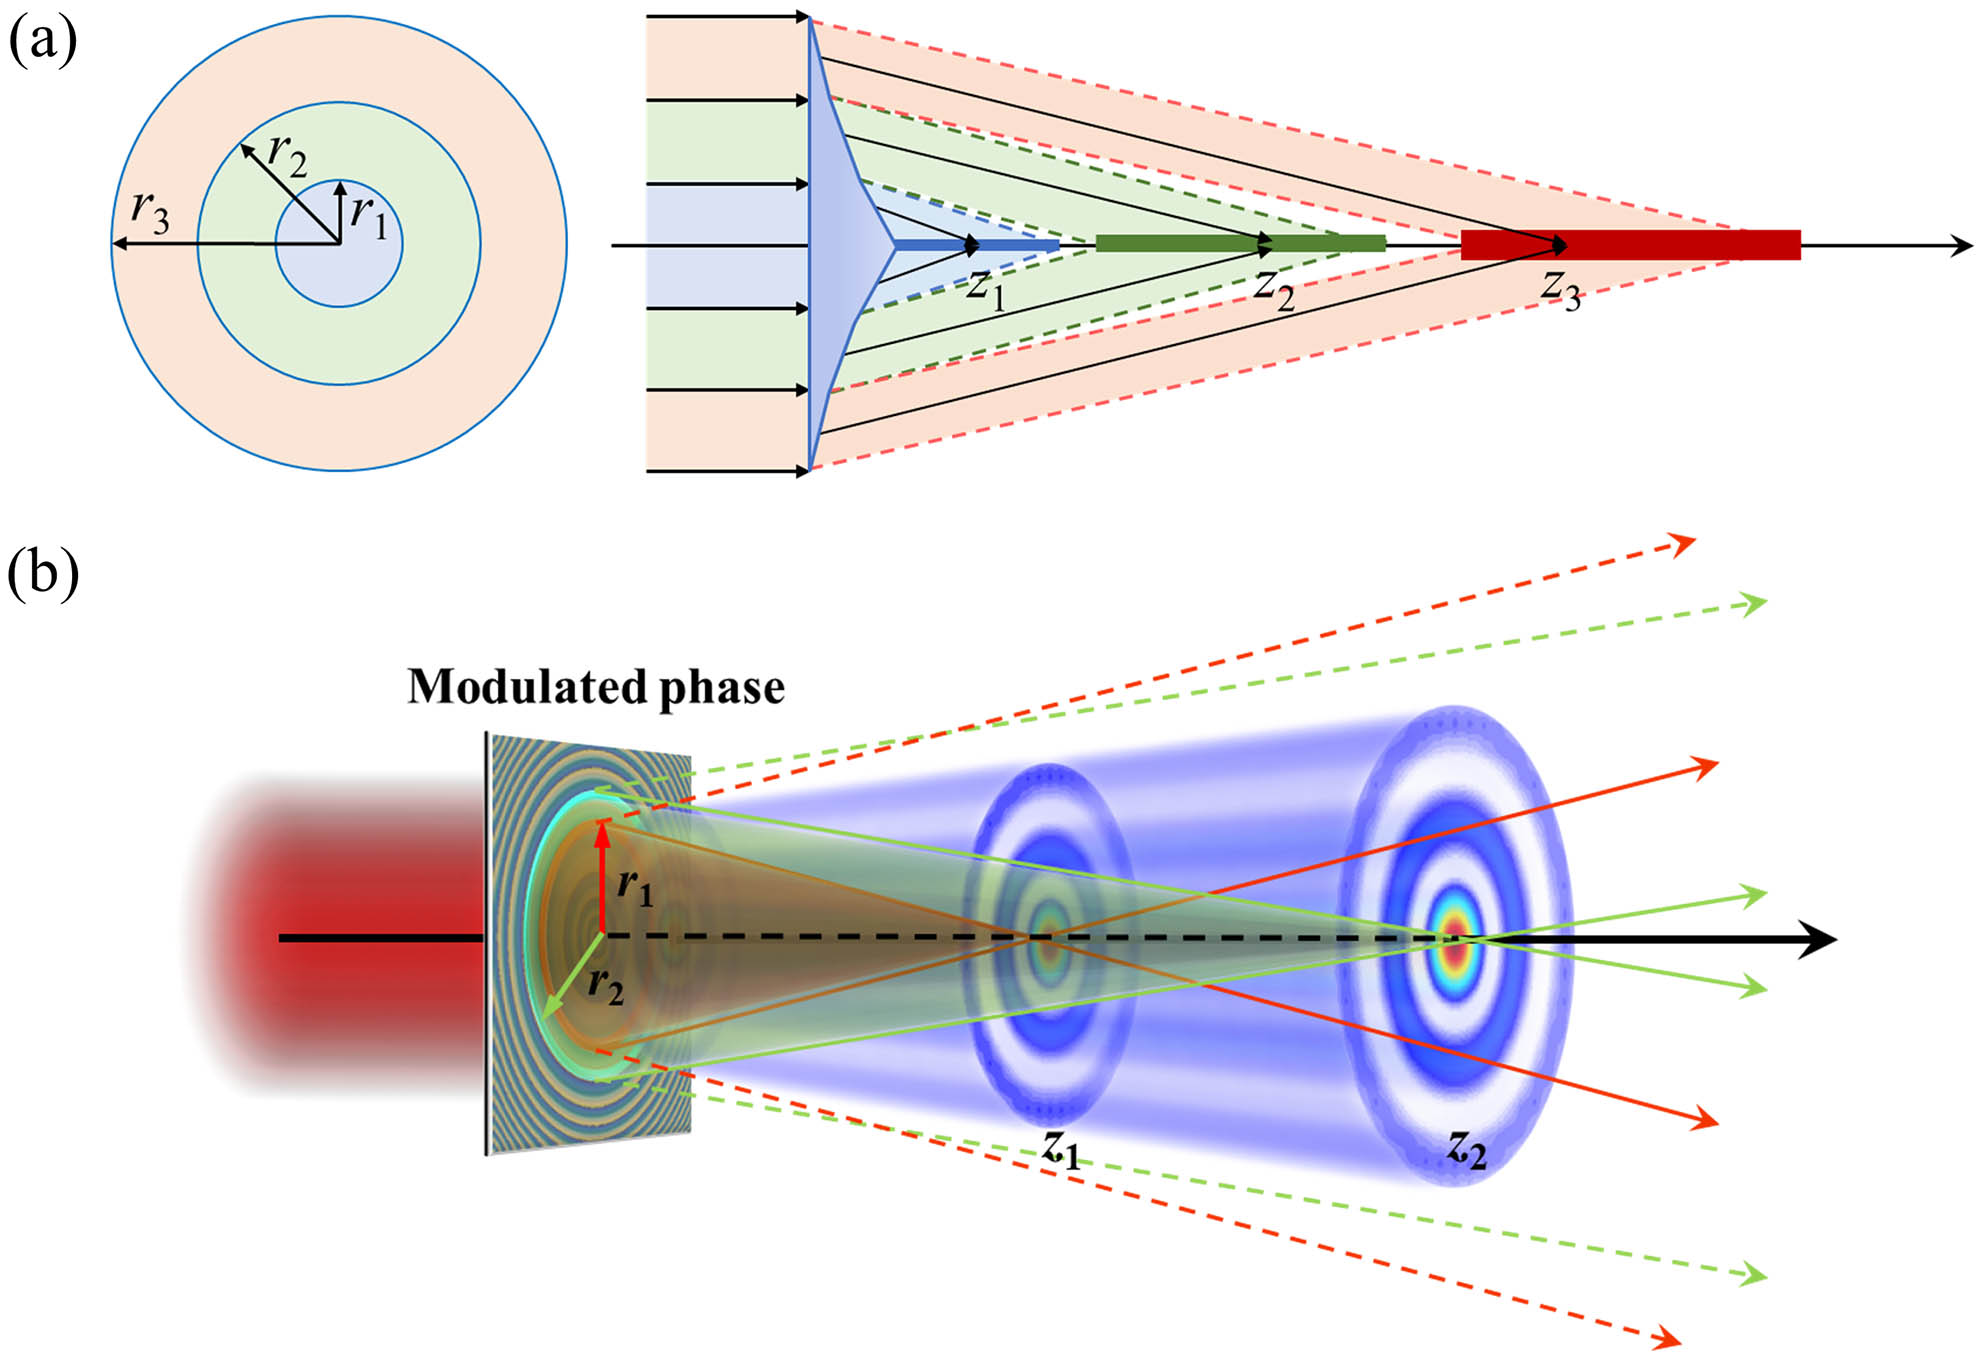 Schematic of (a) transverse-to-longitudinal mapping of Bessel beam and (b) generation of self-similar Bessel-like beam.